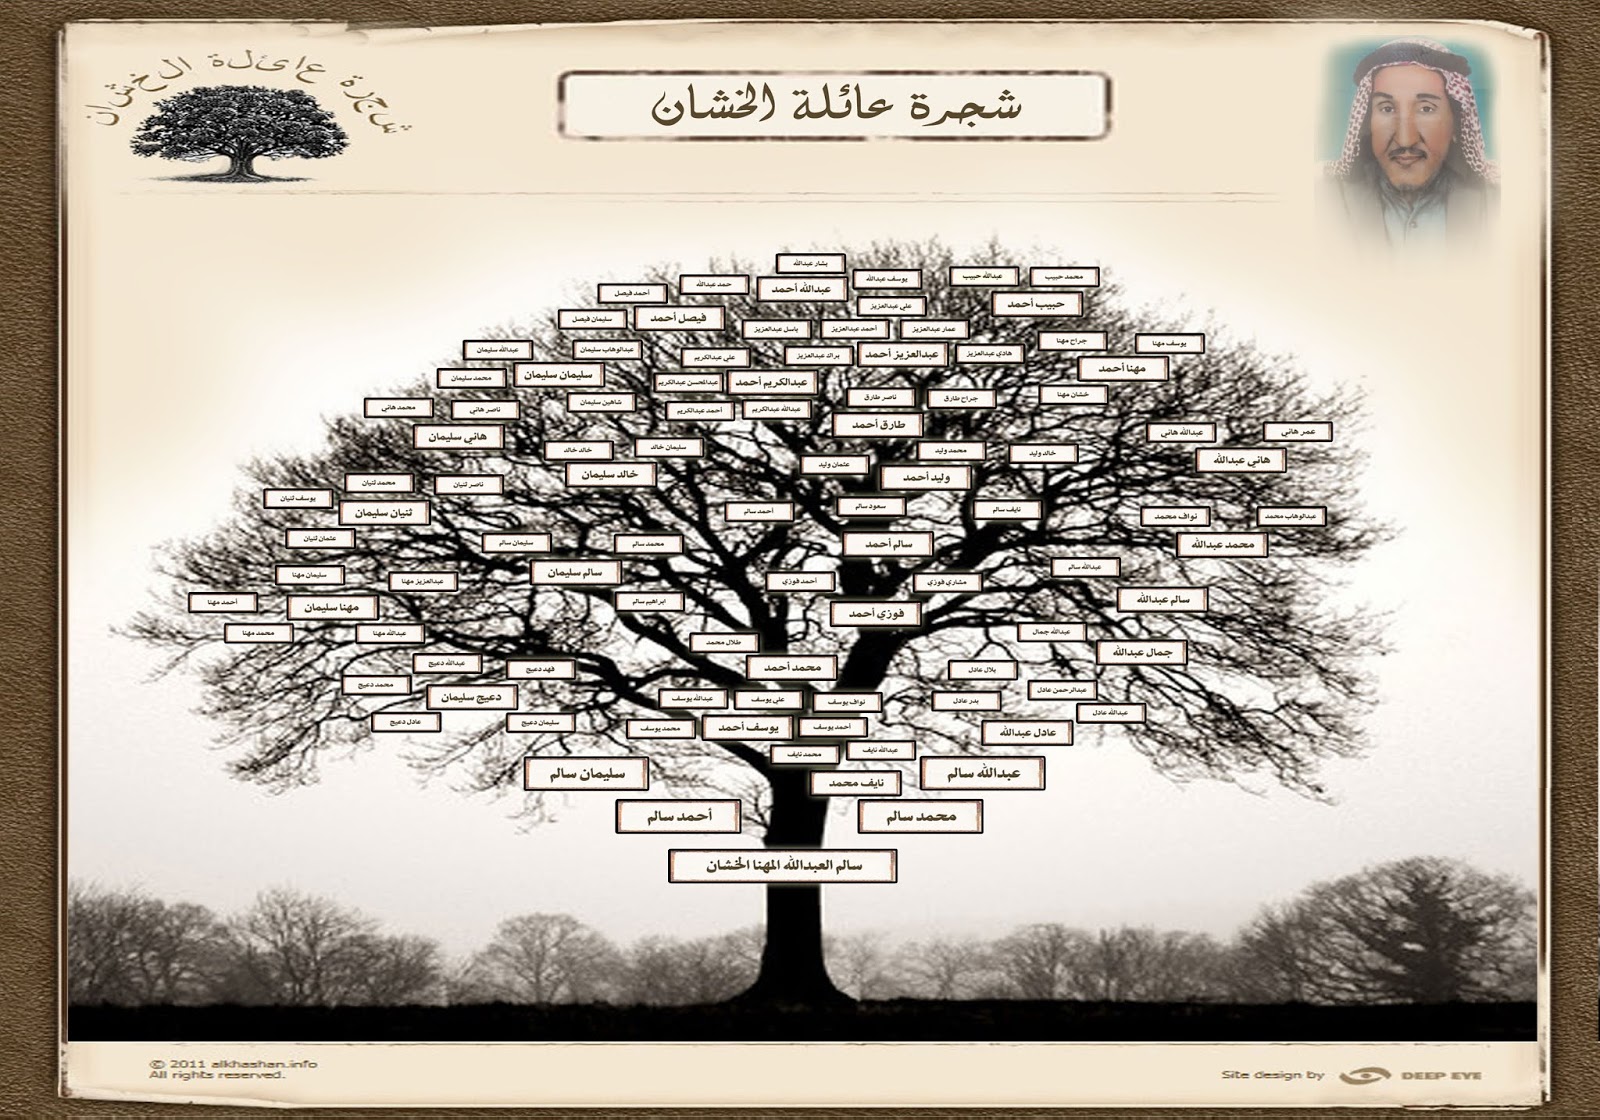 م ك ت ب ة ع ل و م الن س ب Genealogical Library Science يونيو 2018